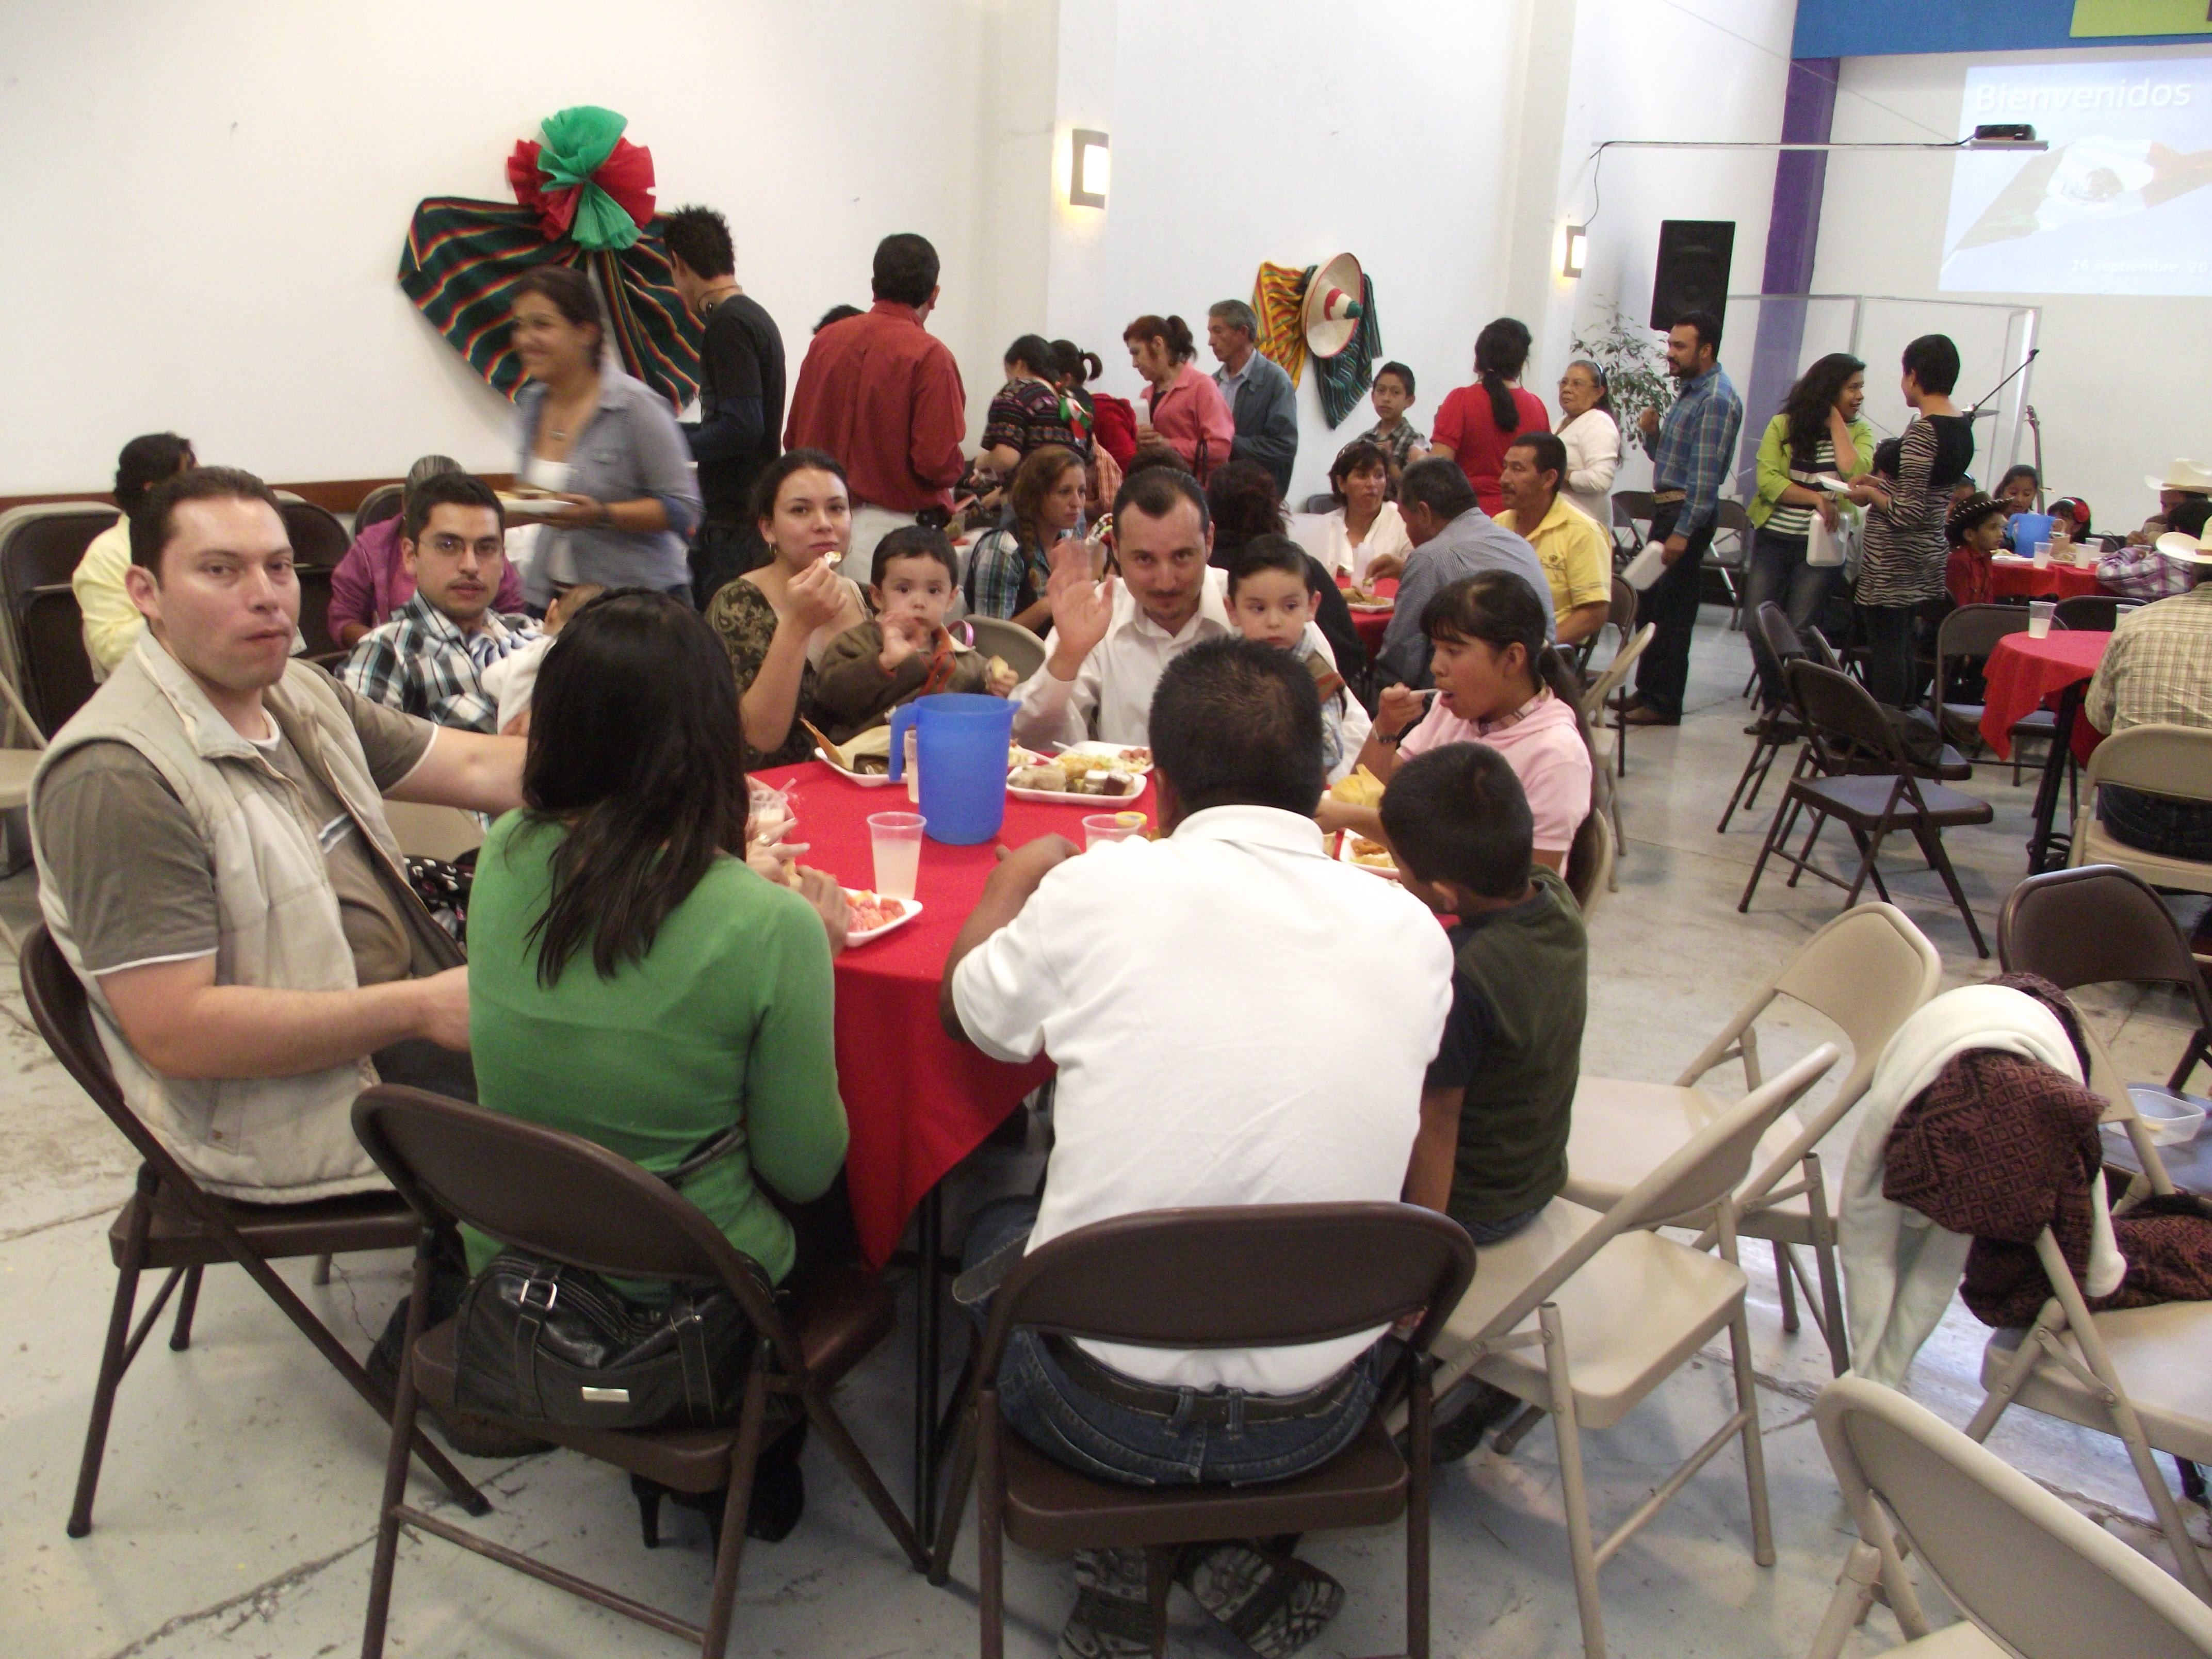 Eating lunch together, Mexican Independence Day, 2012